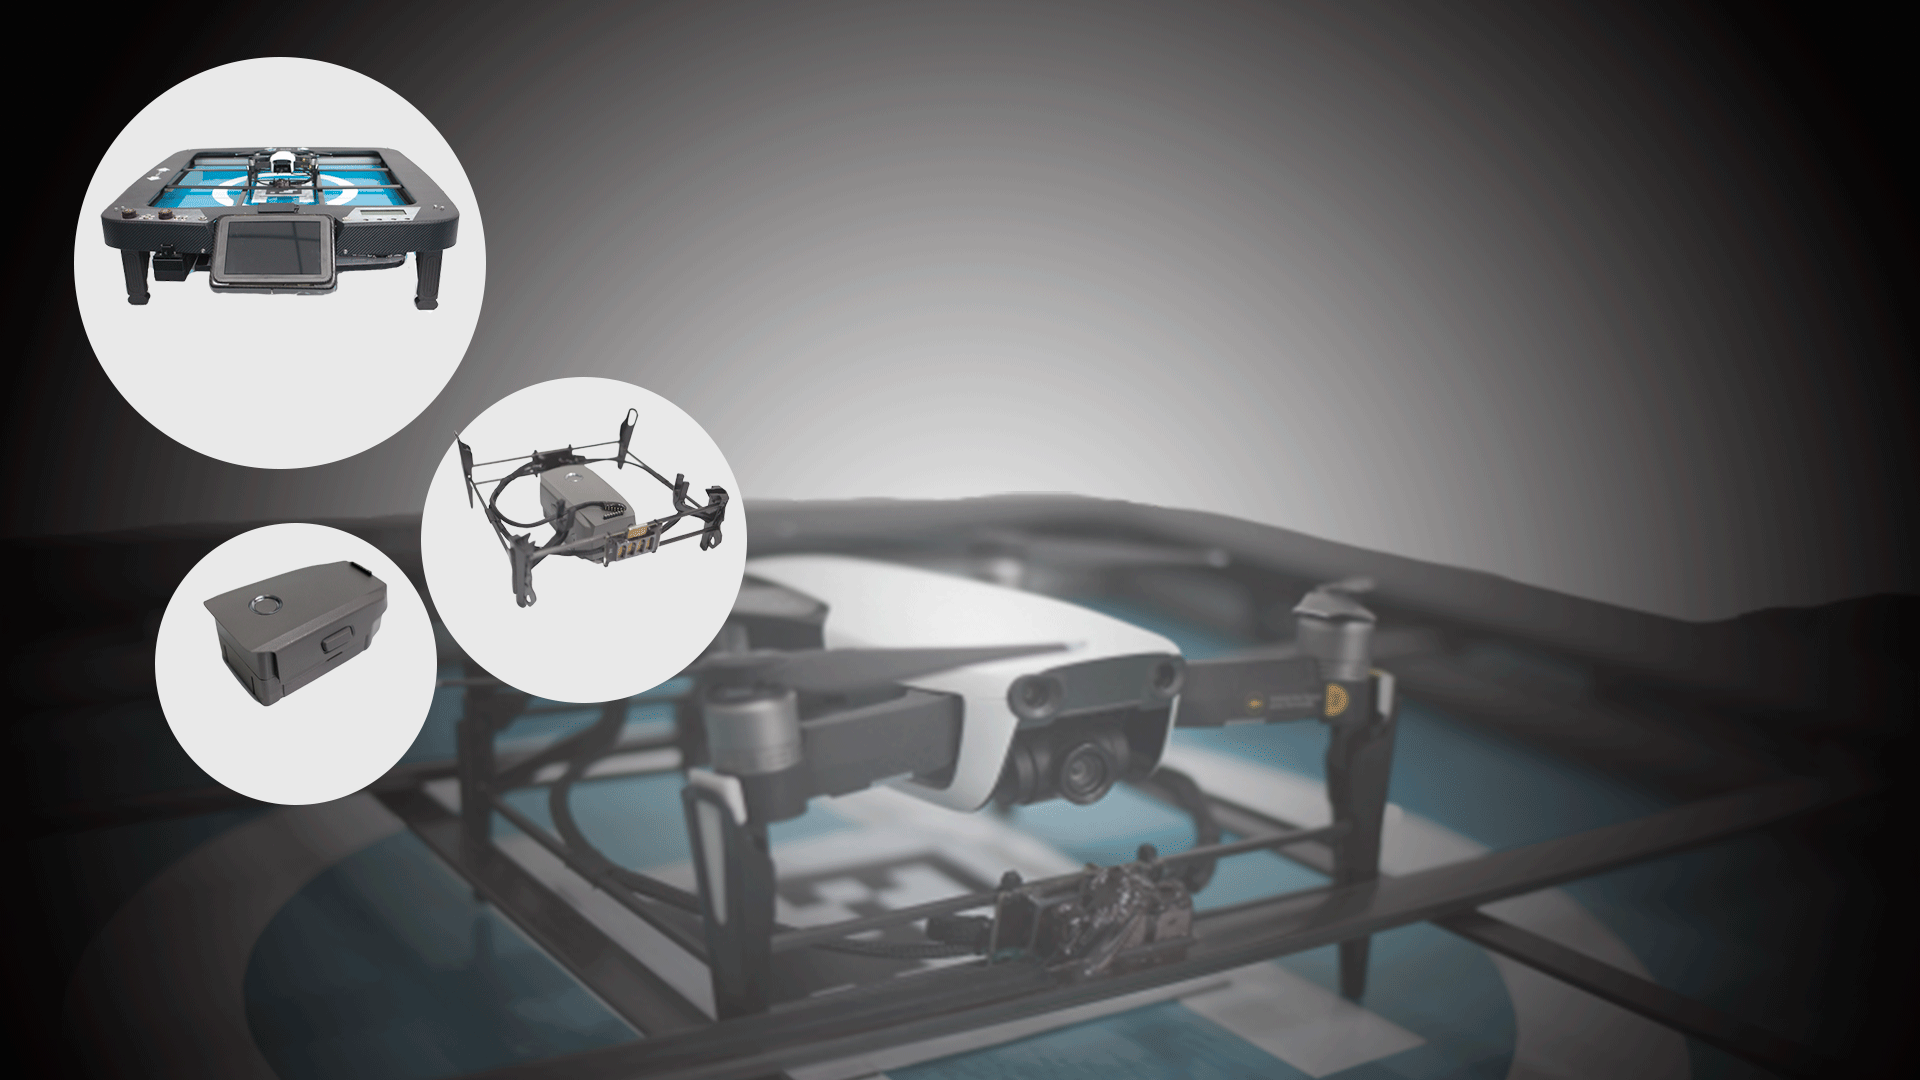 Automated Charging Systems for DJI Drones Make Totally Automated Drone Applications Possible